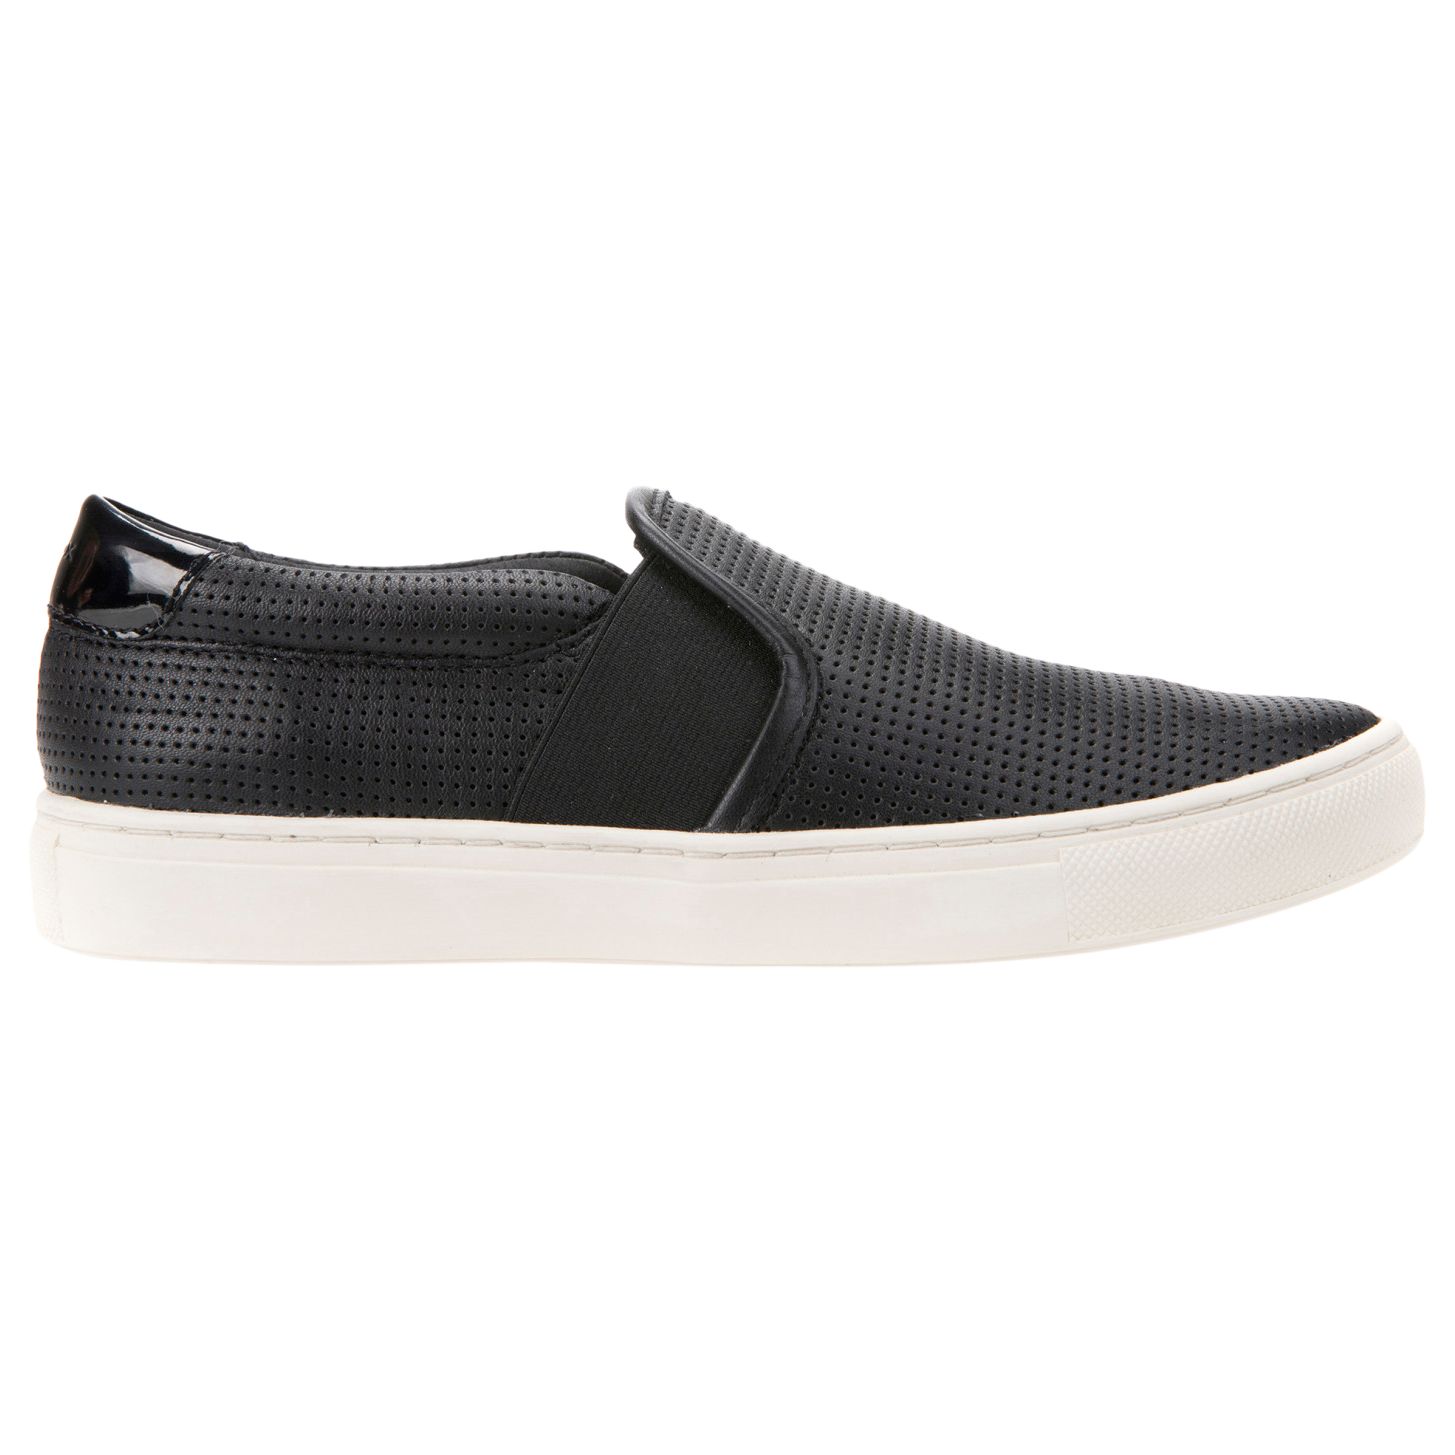 Geox Women's Trysure Leather Slip On Trainers, Black